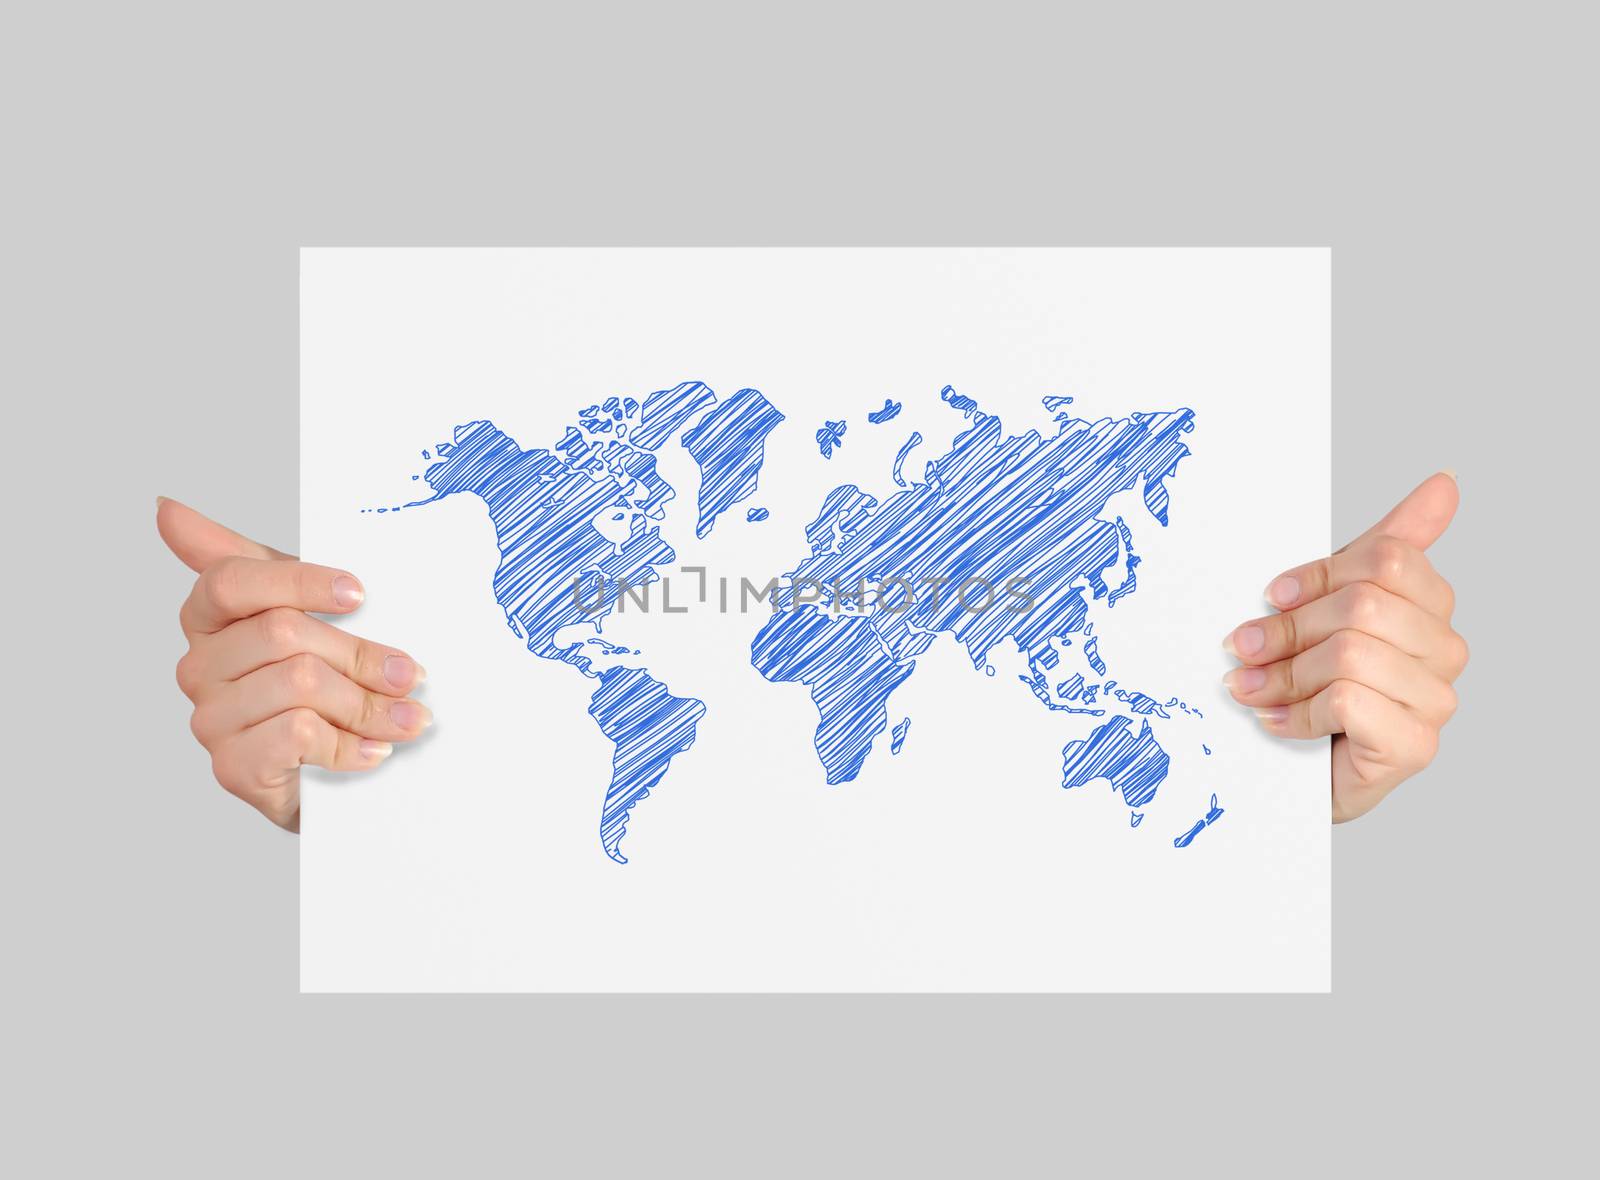 poster with world map in hands on a gray background